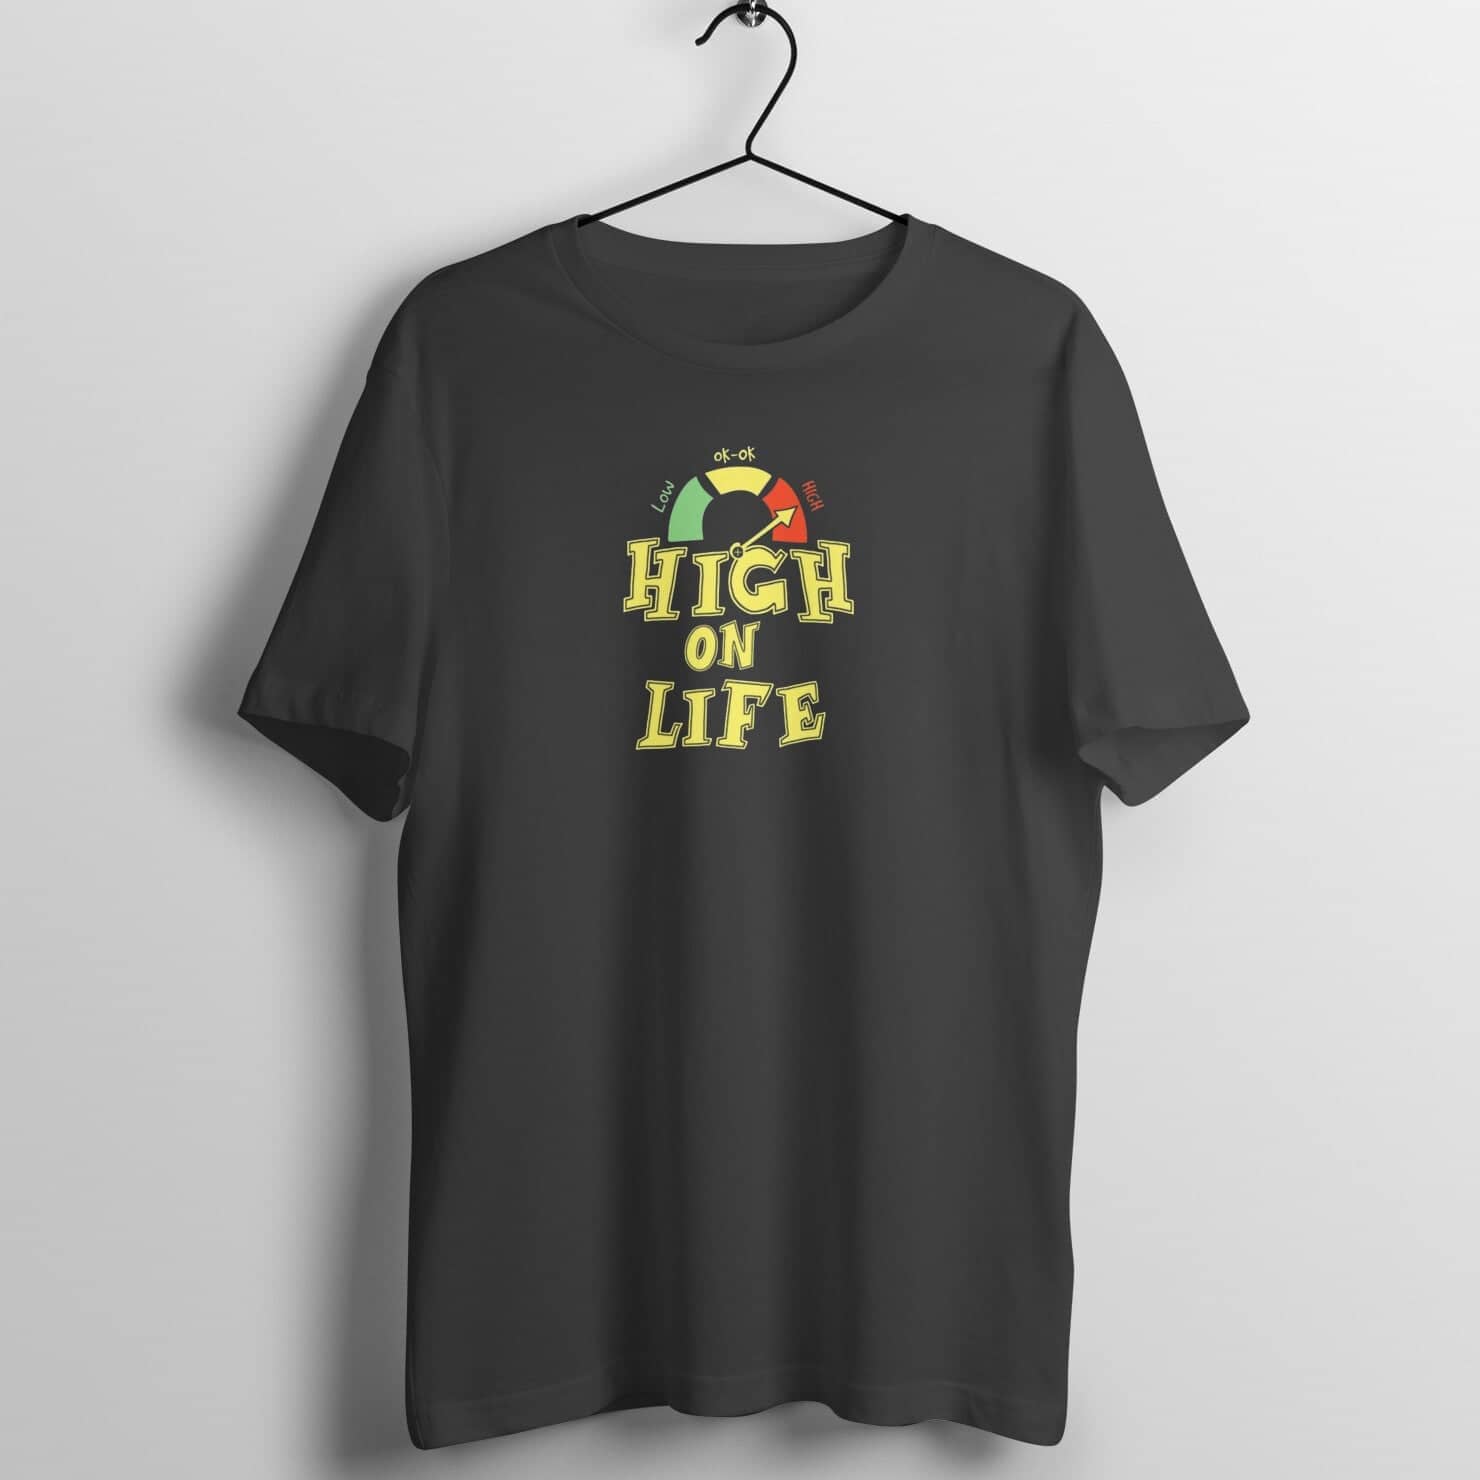 High on Life Special Black T Shirt for Men and Women Printrove Black S 